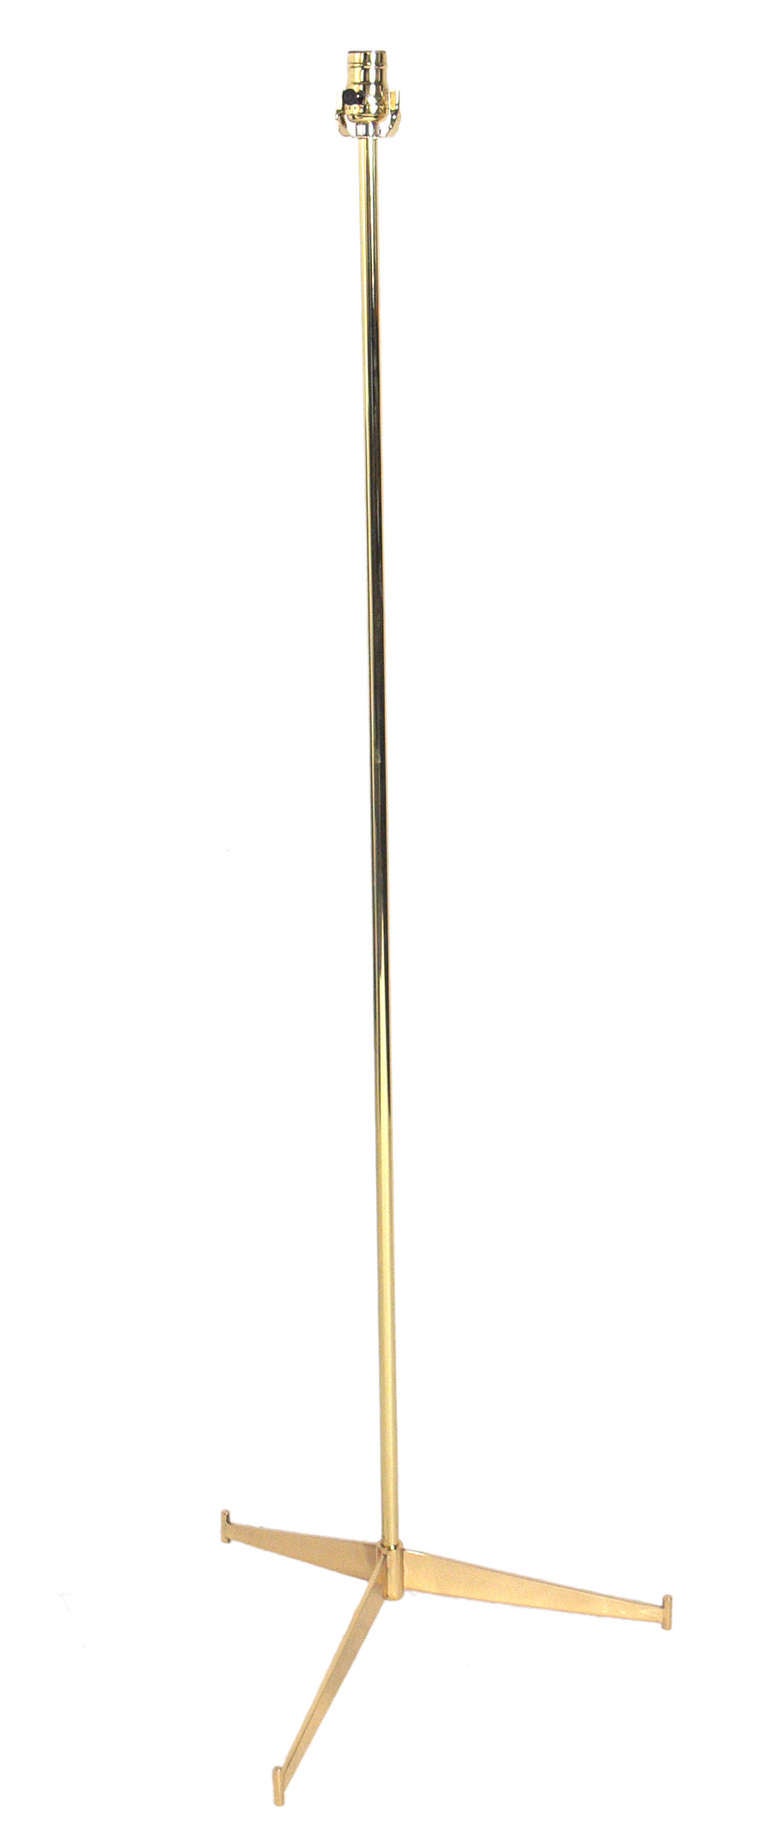 Rare Brass Floor Lamp, designed by Paul McCobb, circa 1950's. Very clean lined modernist design. This example has been polished and lacquered. It is rewired and ready to use. The price in this listing includes the lamp and shade.